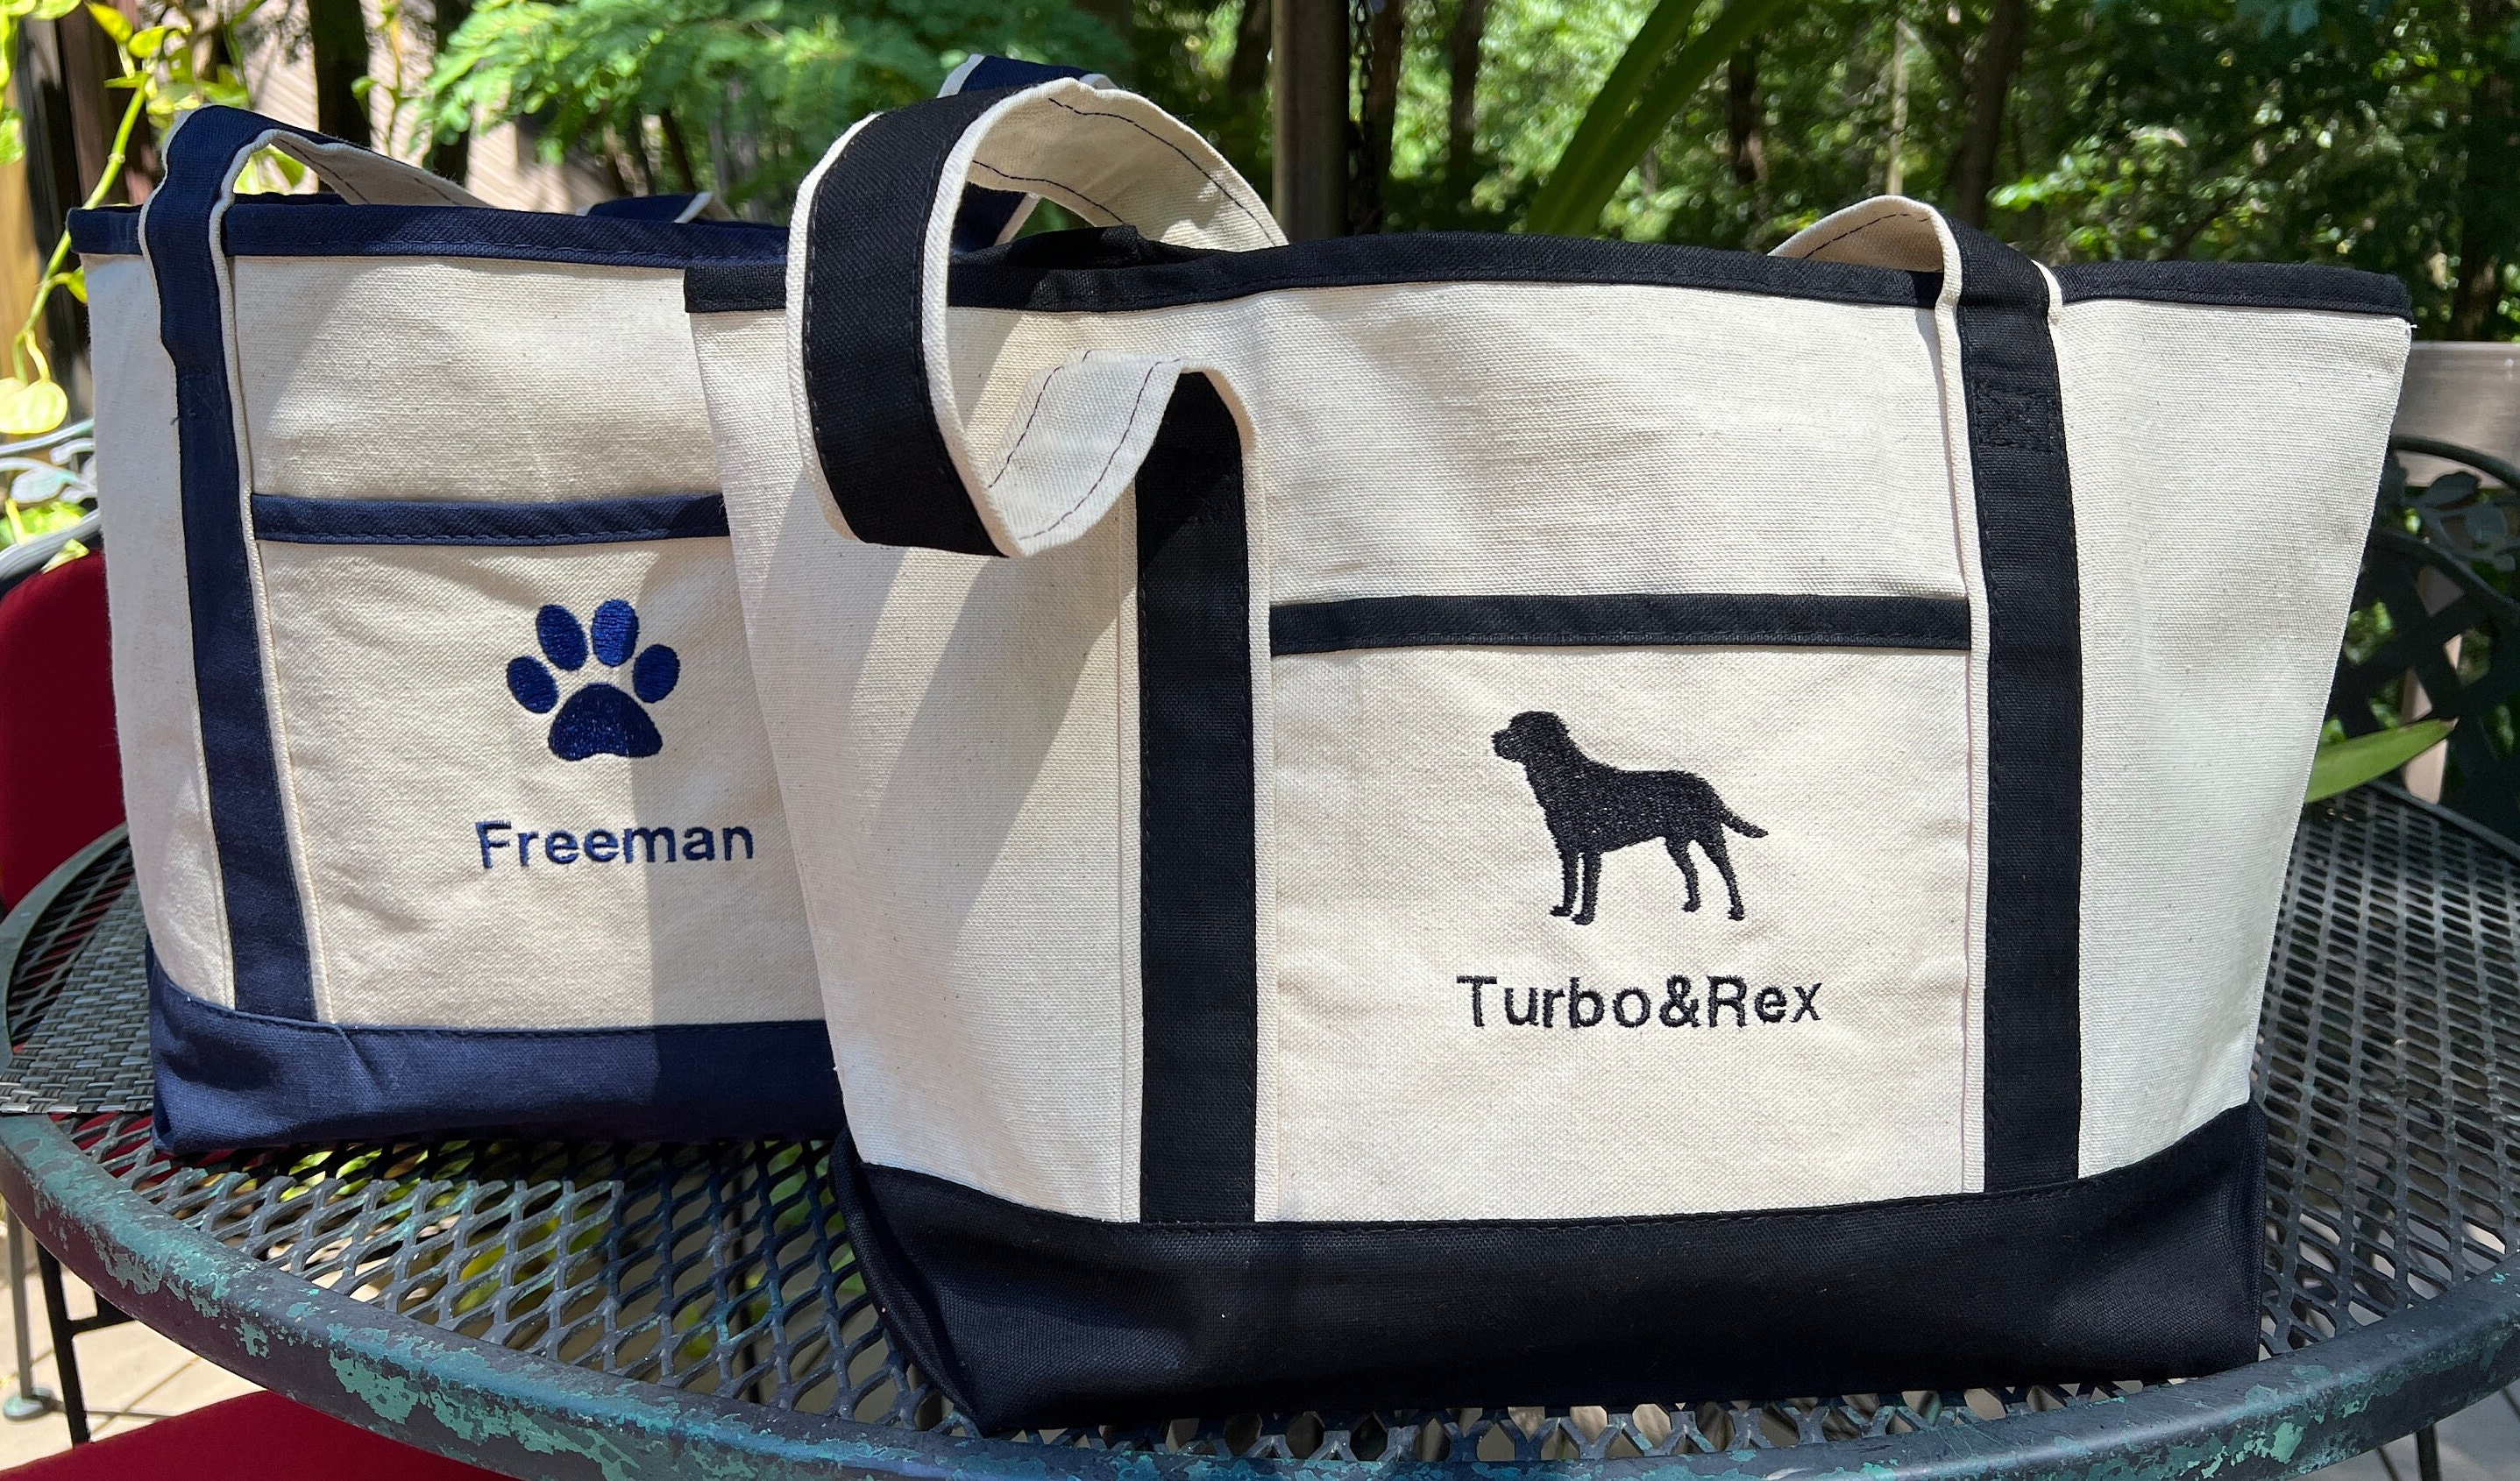 Dog Custom Tote Bag VW Dog Mom Personalized Gift - PERSONAL84